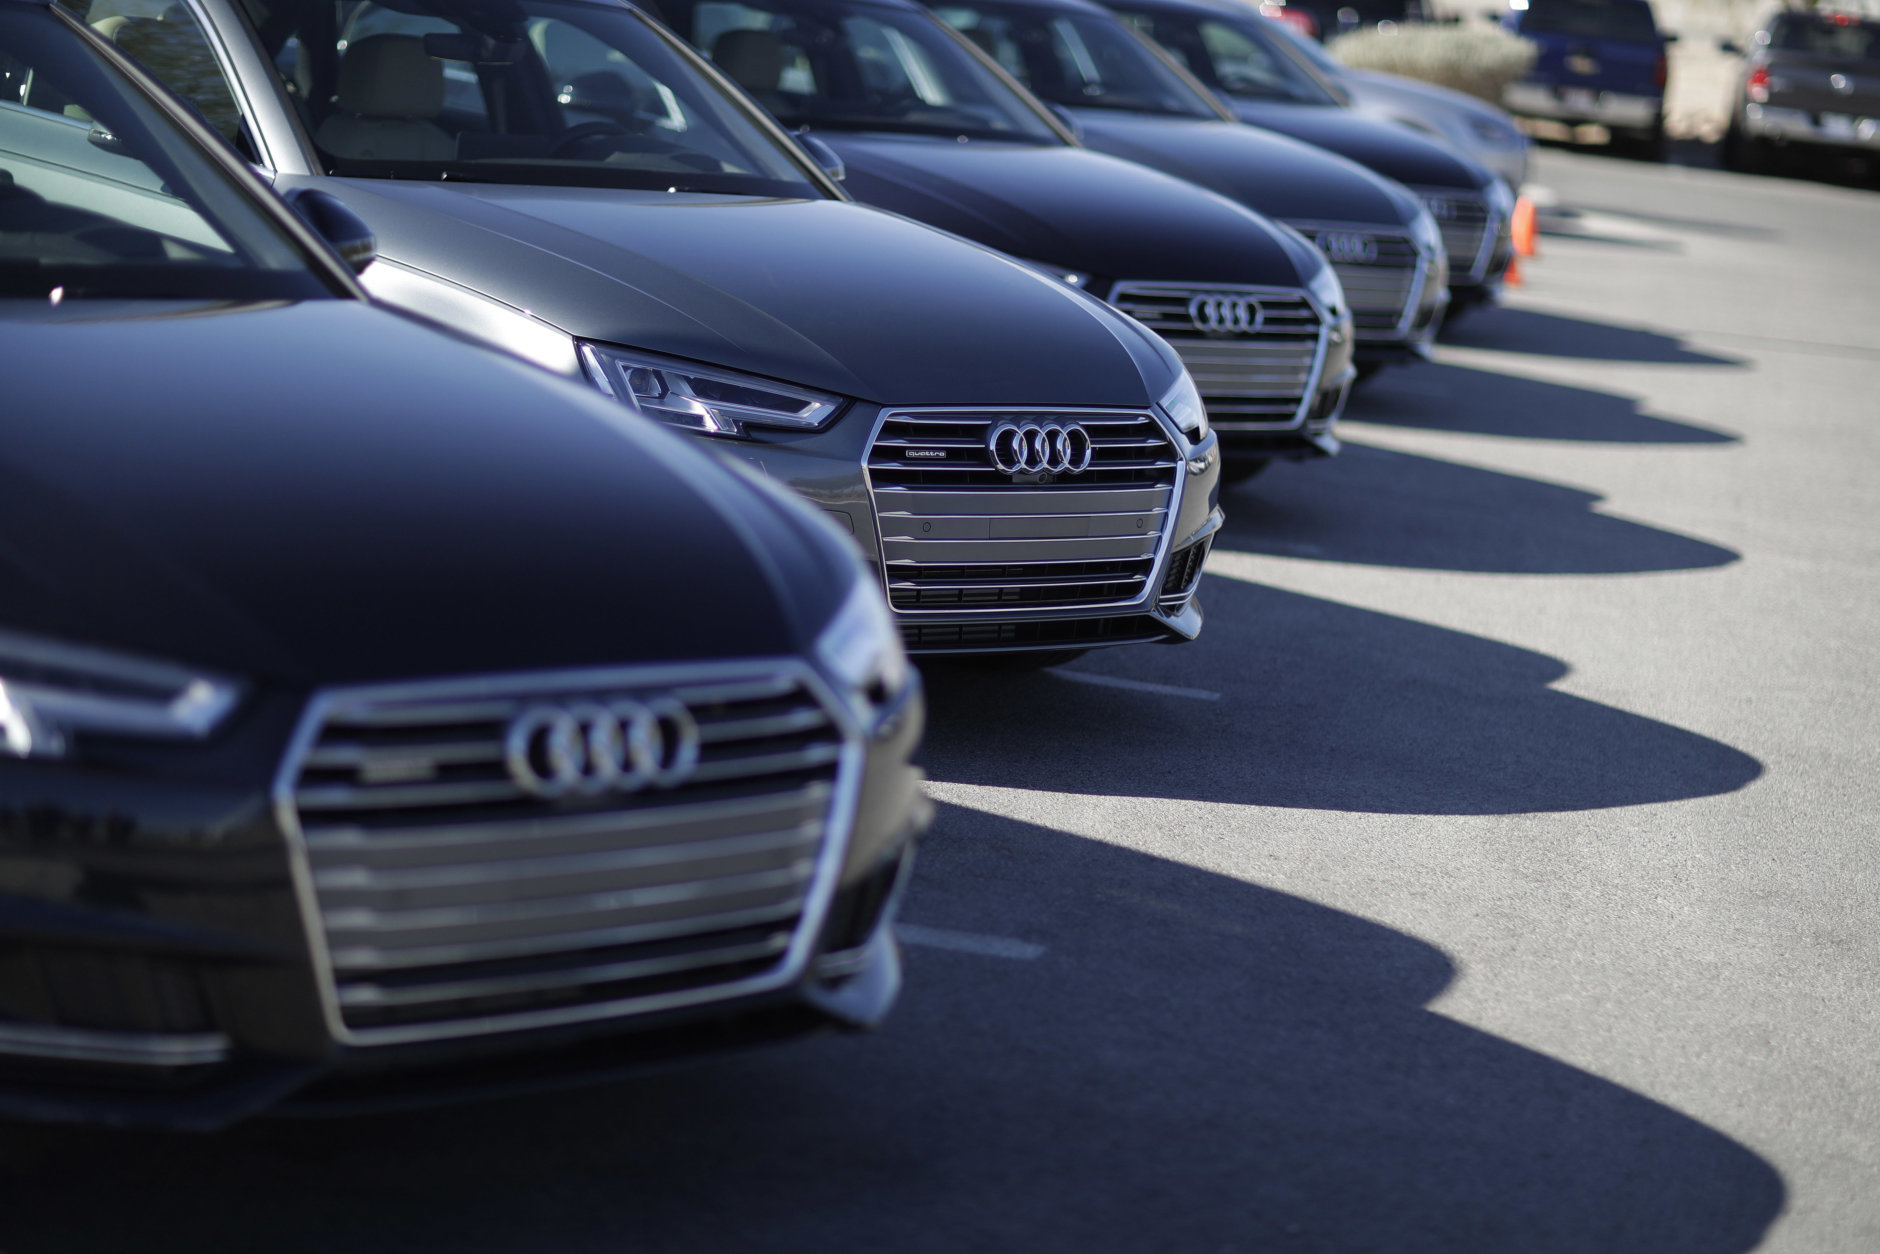 A line of Audi A4 cars are parked before a demonstration of Audi's vehicle-to-infrastructure technology Tuesday, Dec. 6, 2016, in Las Vegas. The technology allows vehicles to "read" red lights ahead and tell the driver how long it'll be before the signal turns green. For the driver, the system puts a traffic signal icon on the dashboard telling how many seconds the light will remain red. (AP Photo/John Locher)